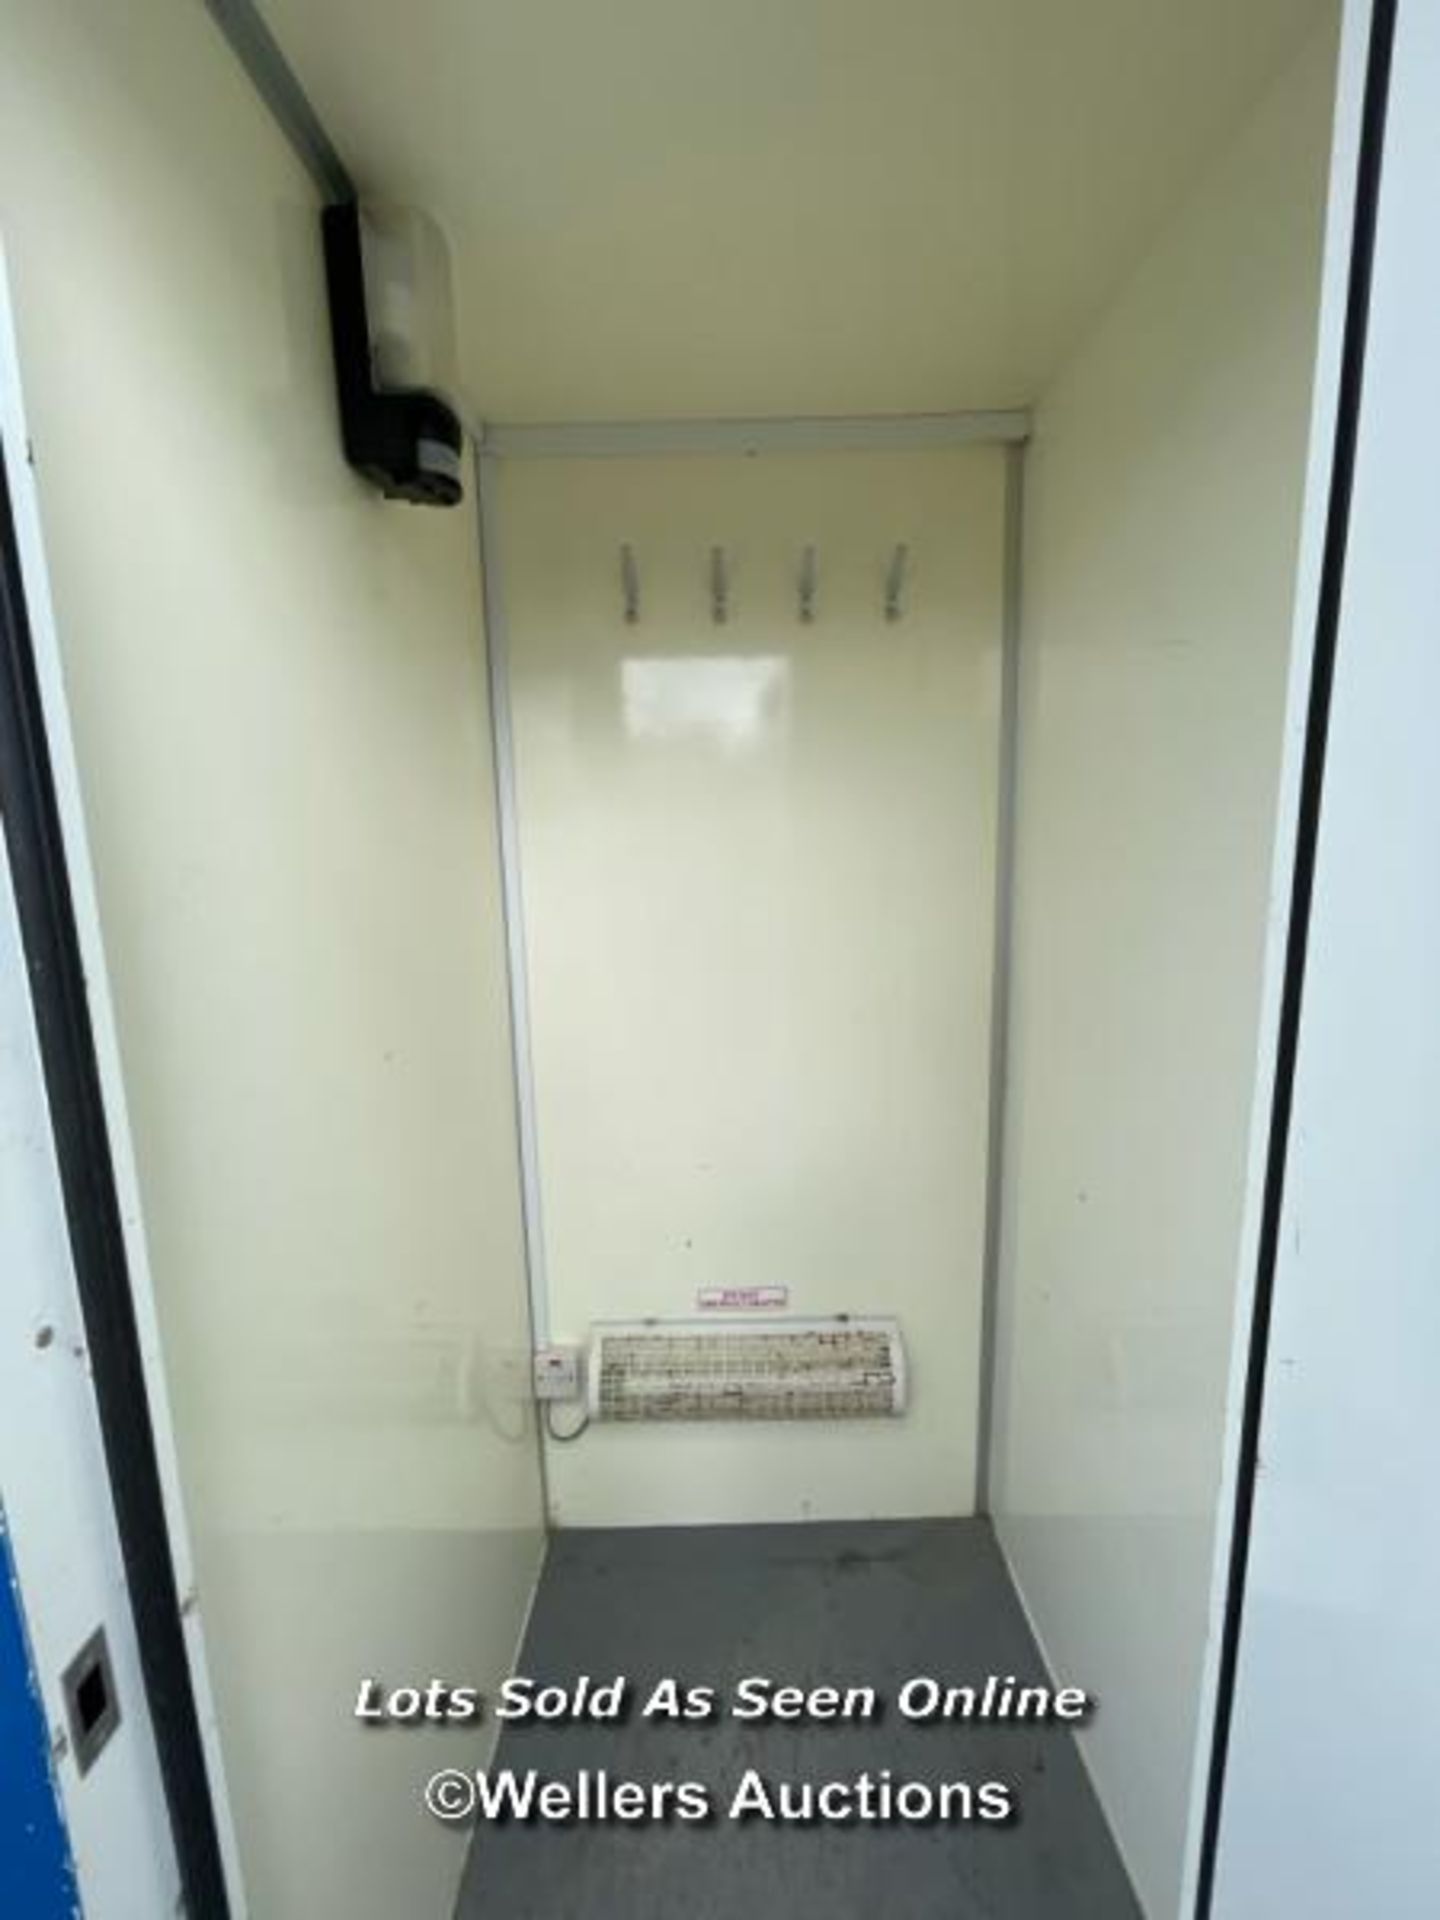 6 PERSON 12 X 7.5FT AJC EASY CABIN TOWABLE WELFARE UNIT, INCLUDES WASH BASIN, KETTLE, MICROWAVE, - Image 13 of 20